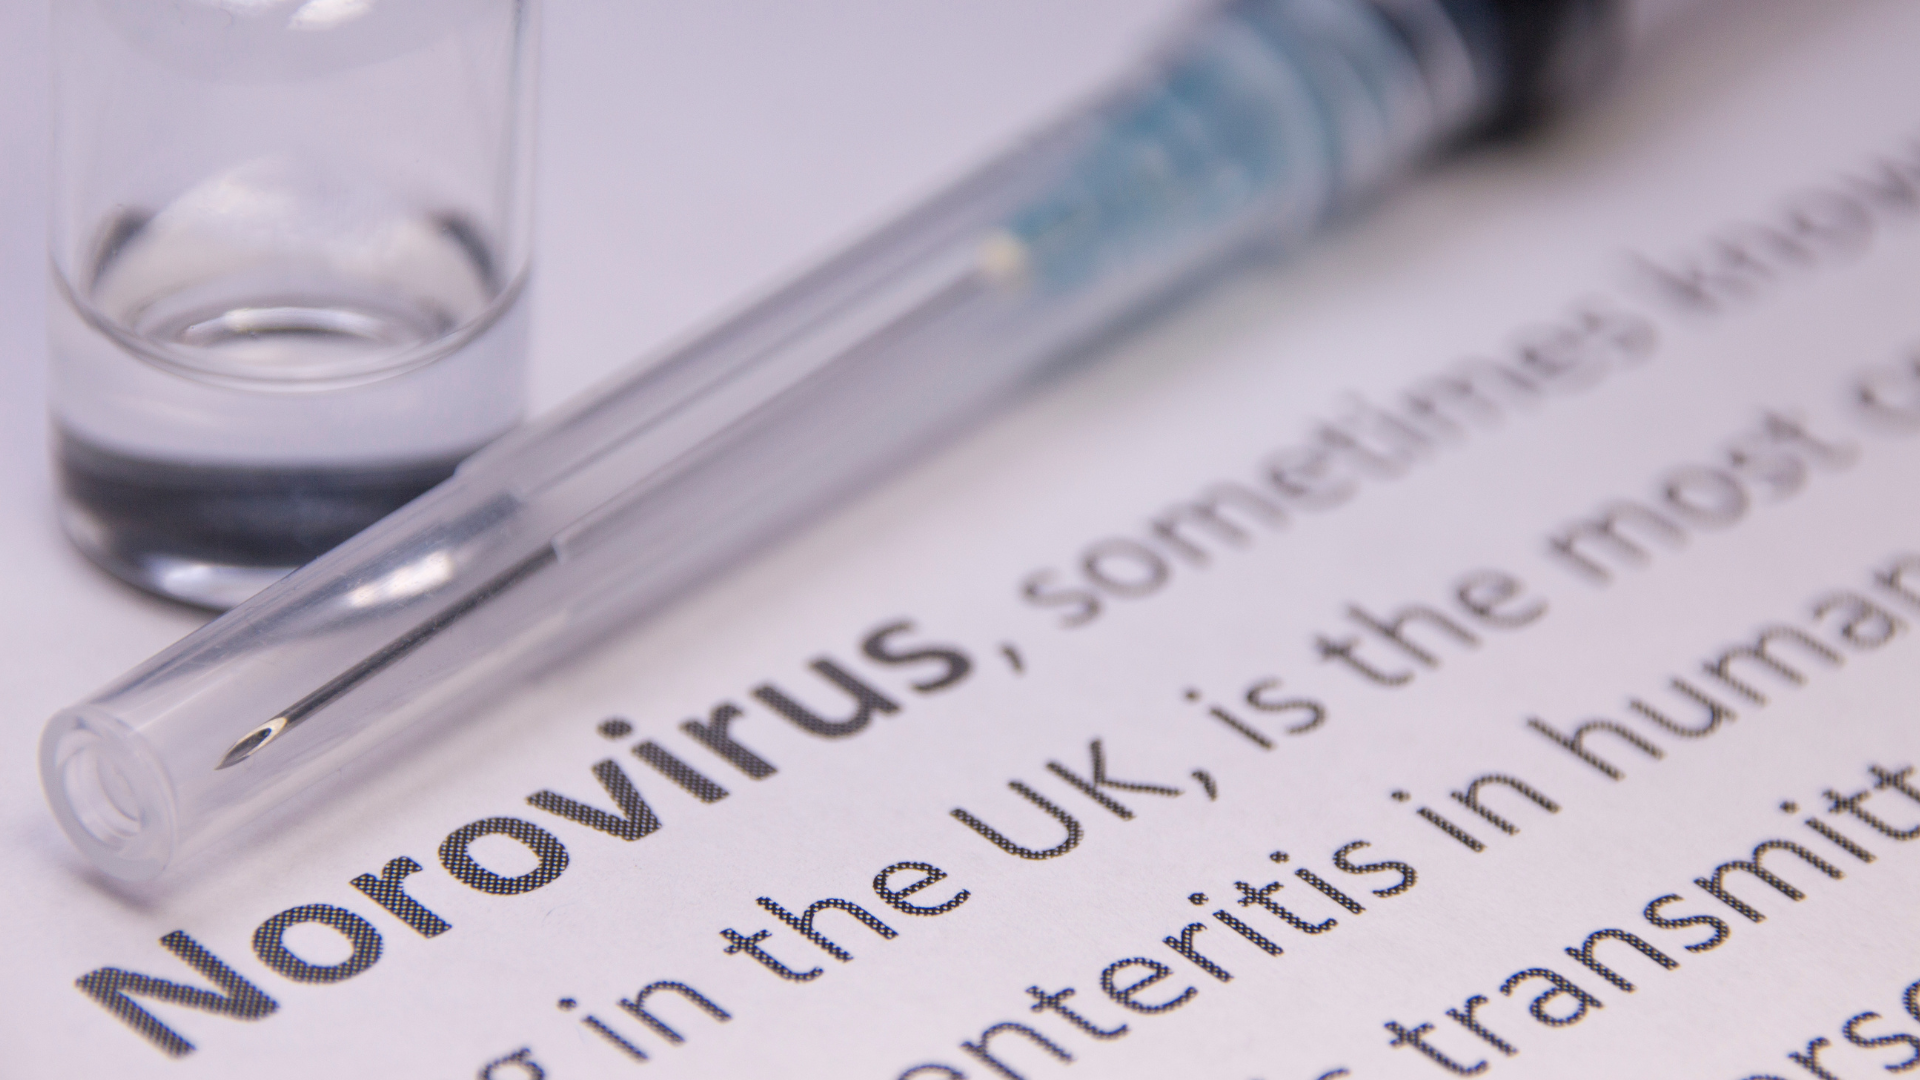 Sample and vial over a report that reads 'Norovirus'.